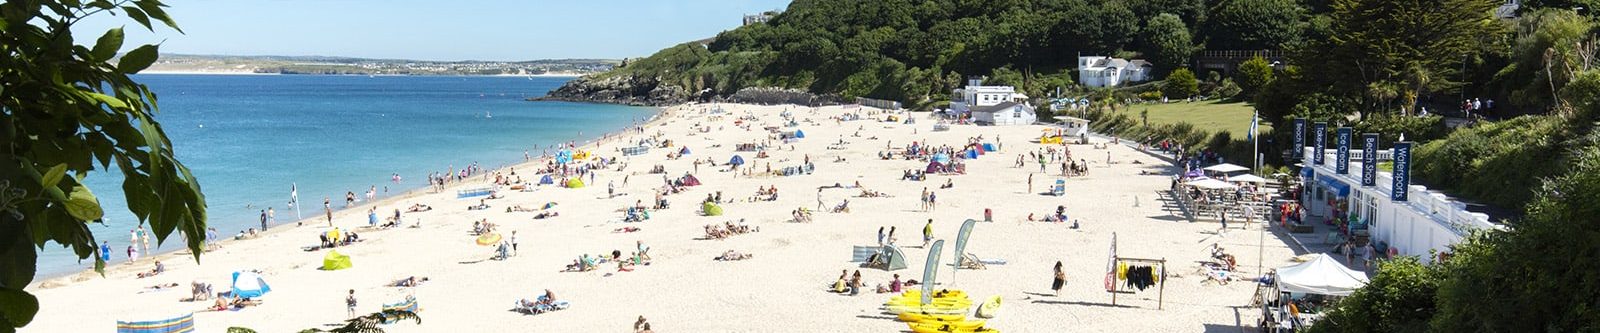 people sunbathing and swimming at Porthminster beach